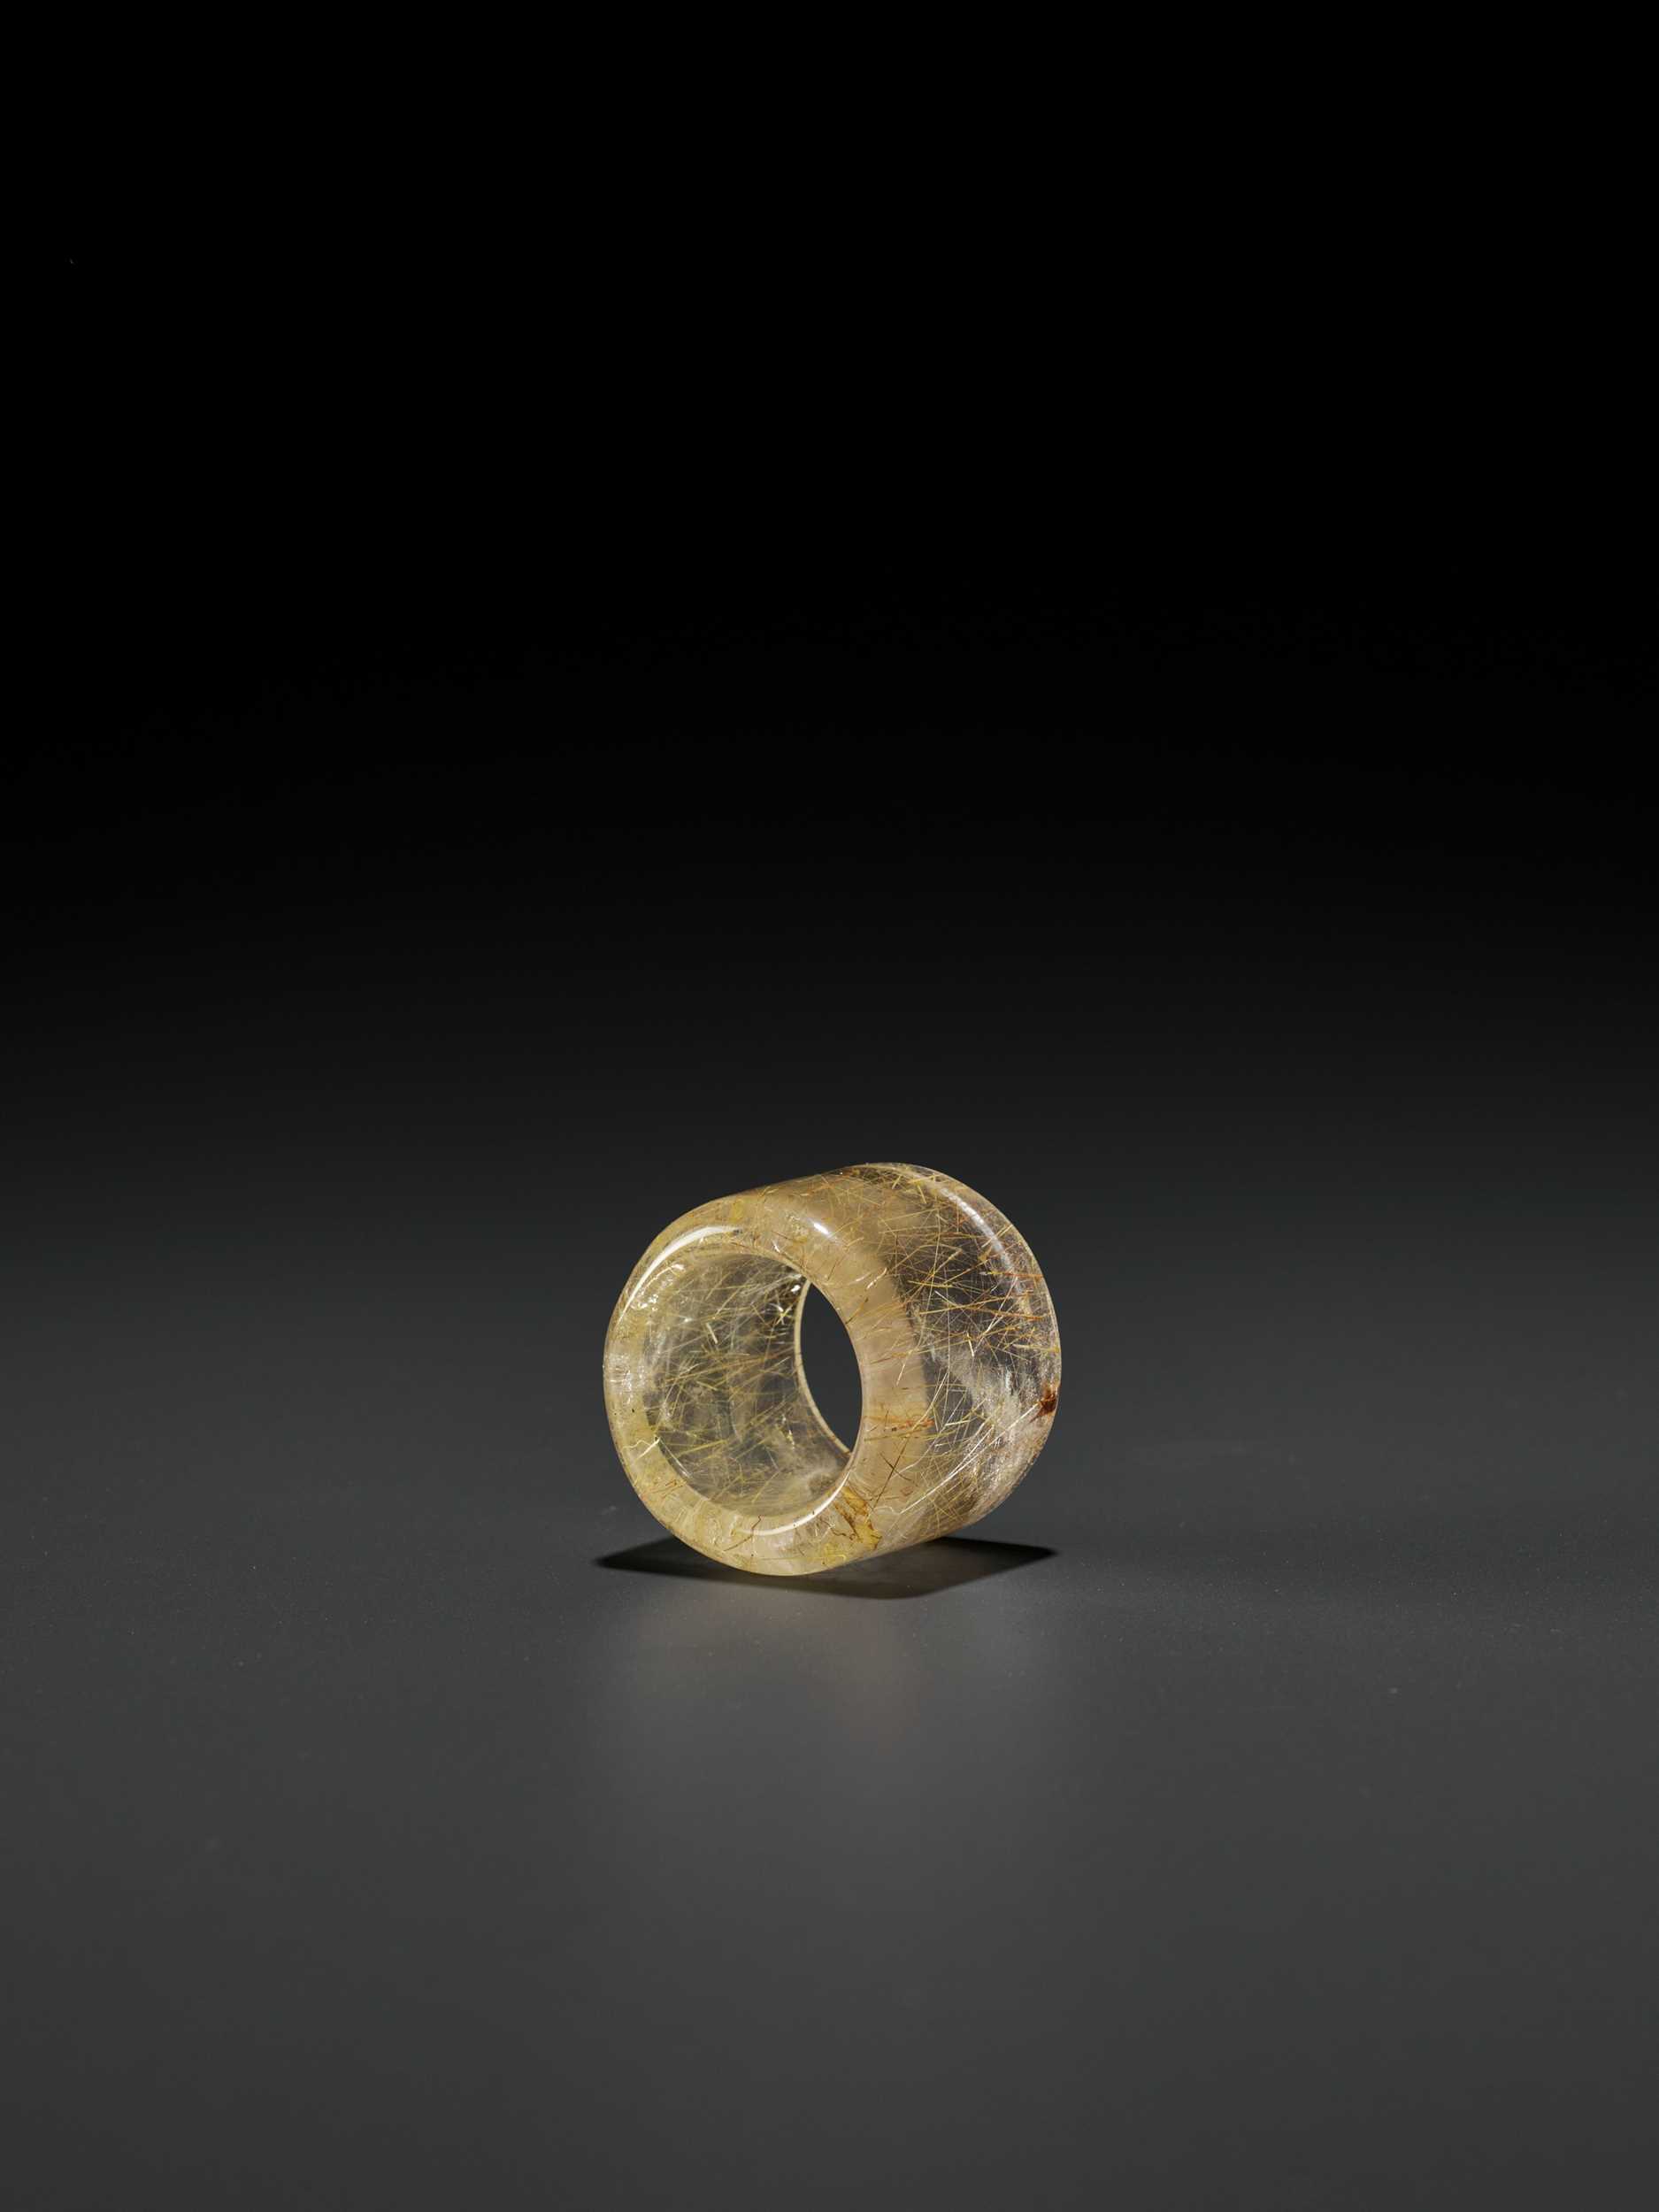 Lot 46 - A ‘HAIR’ CRYSTAL ARCHER’S RING, QING DYNASTY